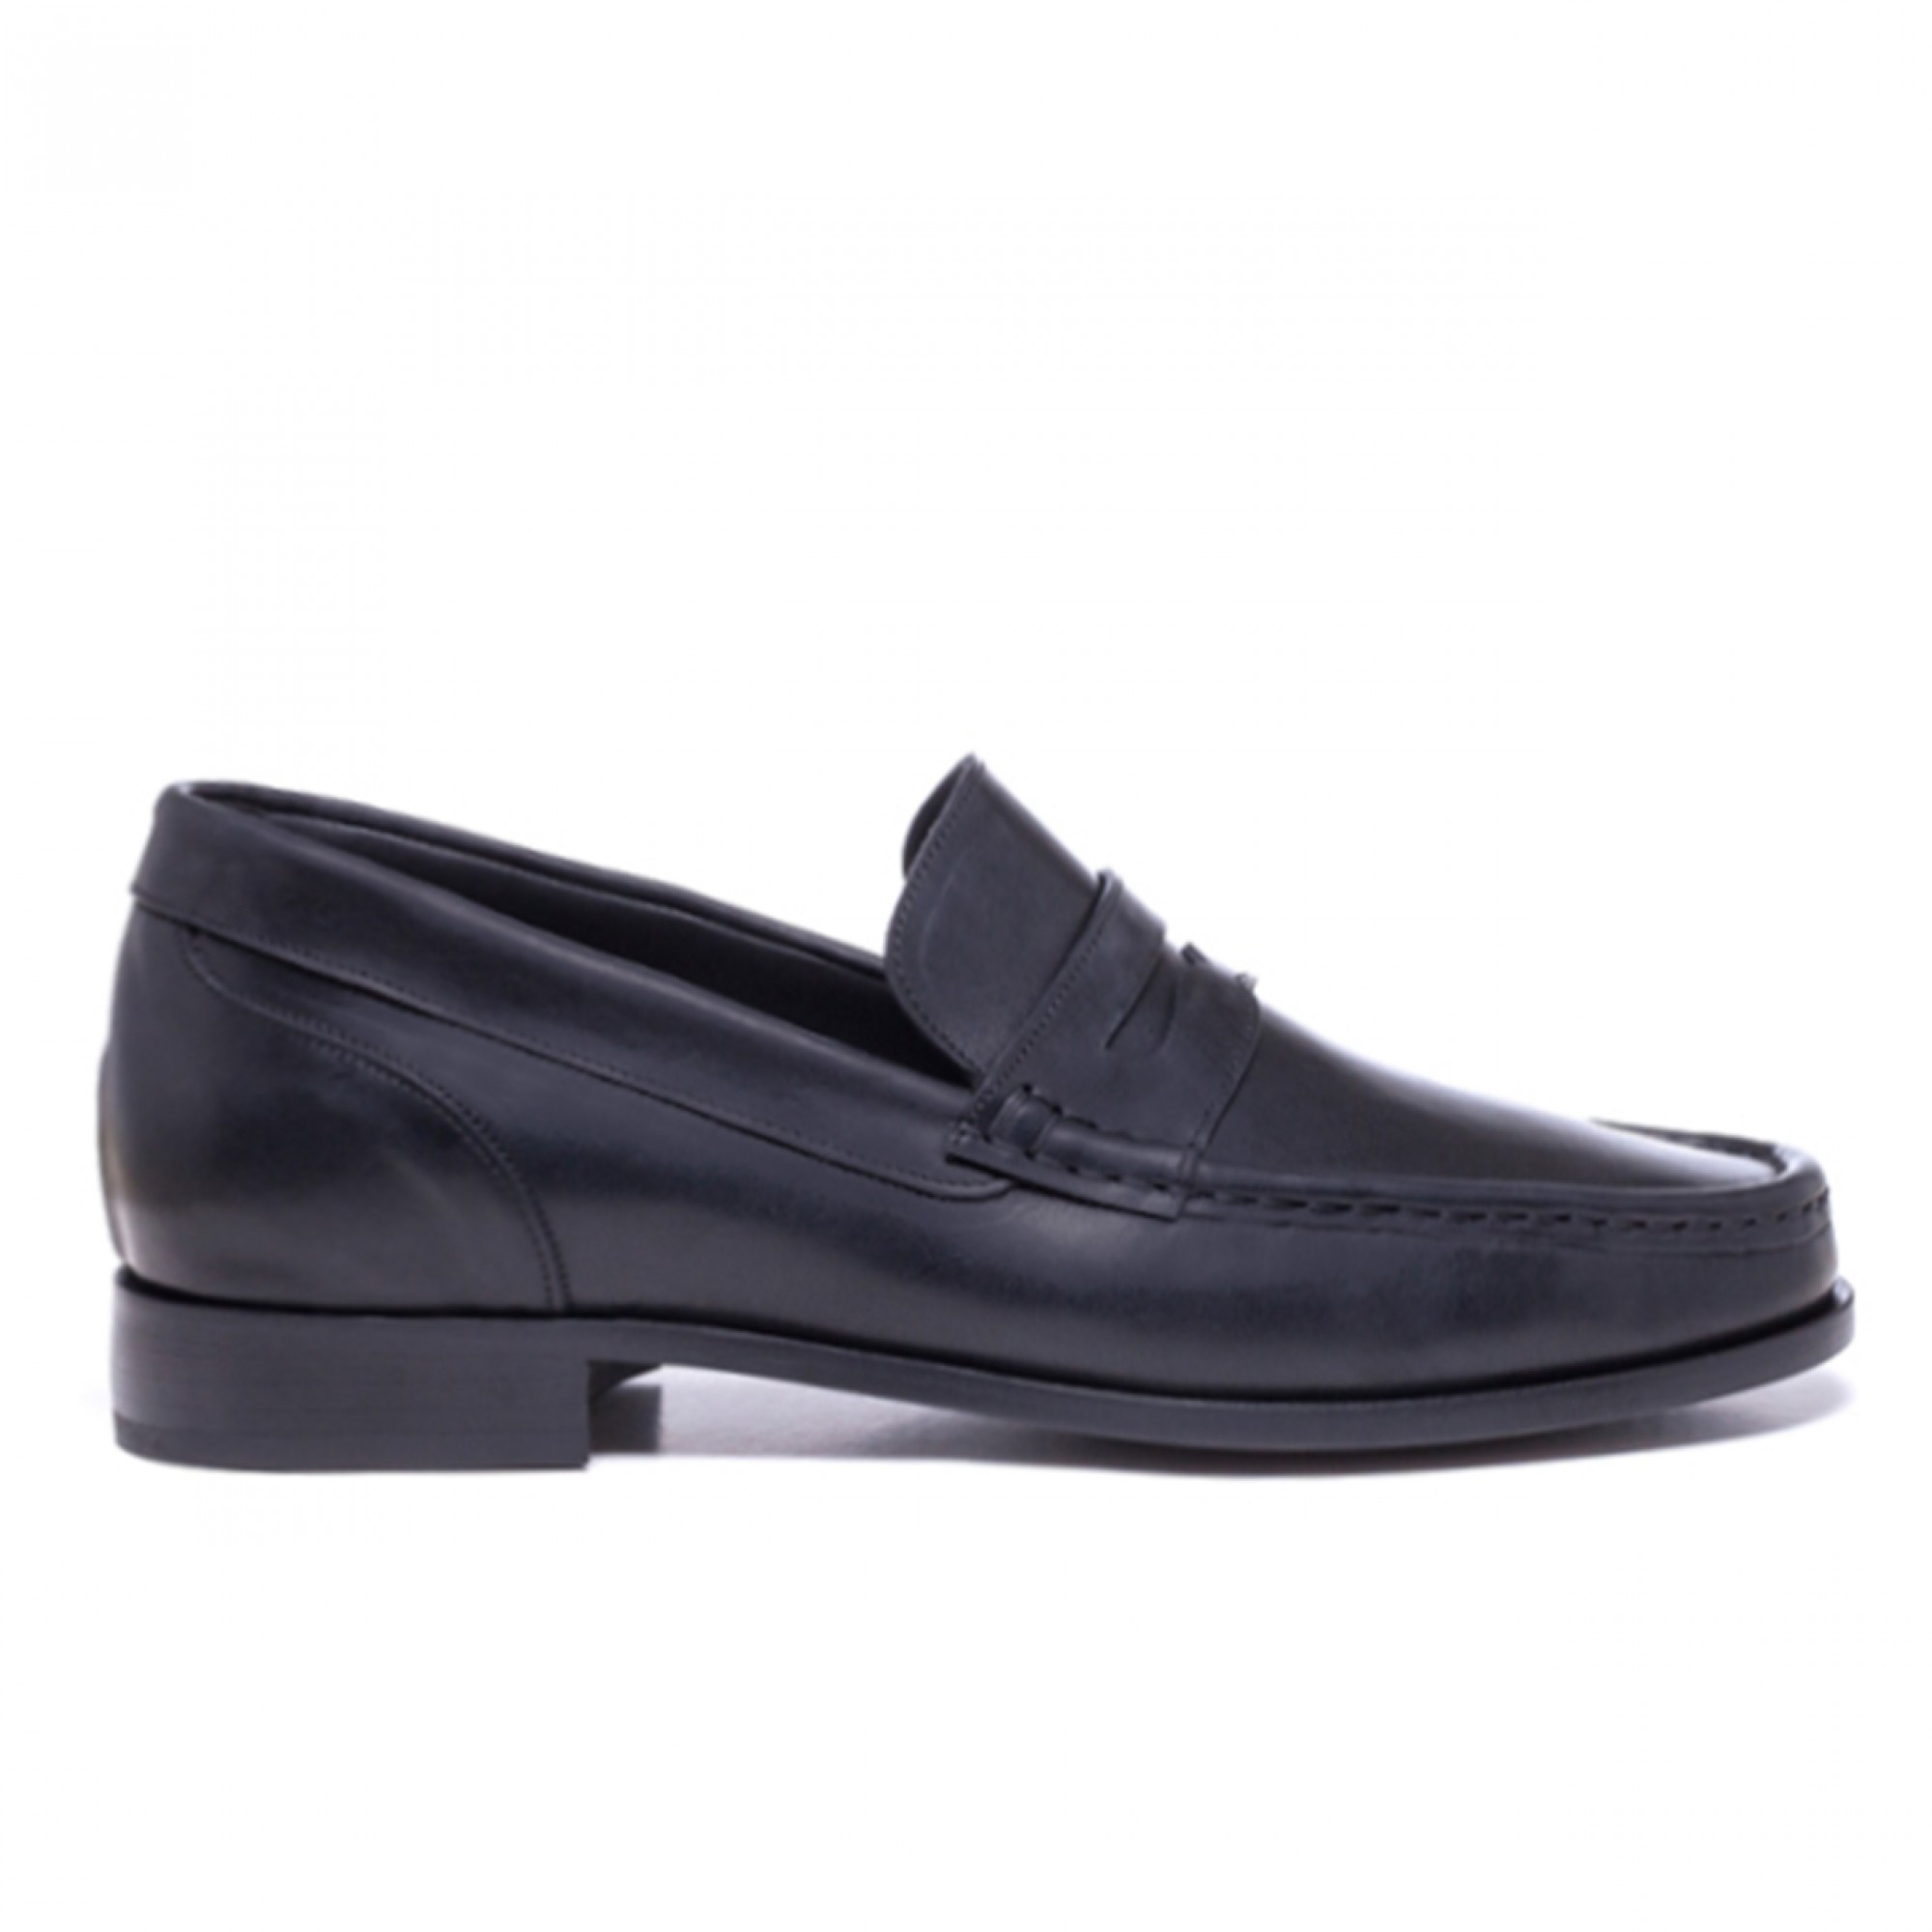 Marocco - Elevator Loafers in Cordovan Leather up to 6 cm